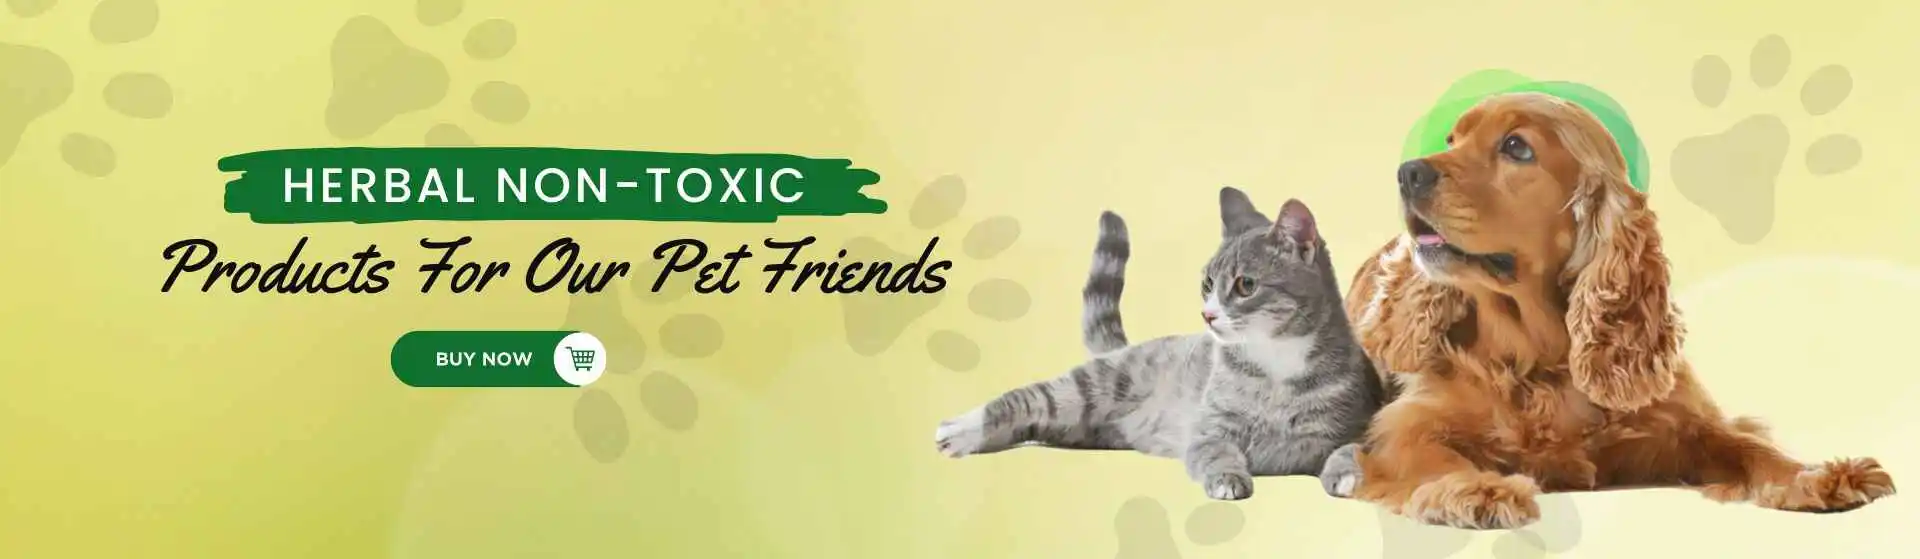 Herbal Non Toxic Product for our Pet Friend